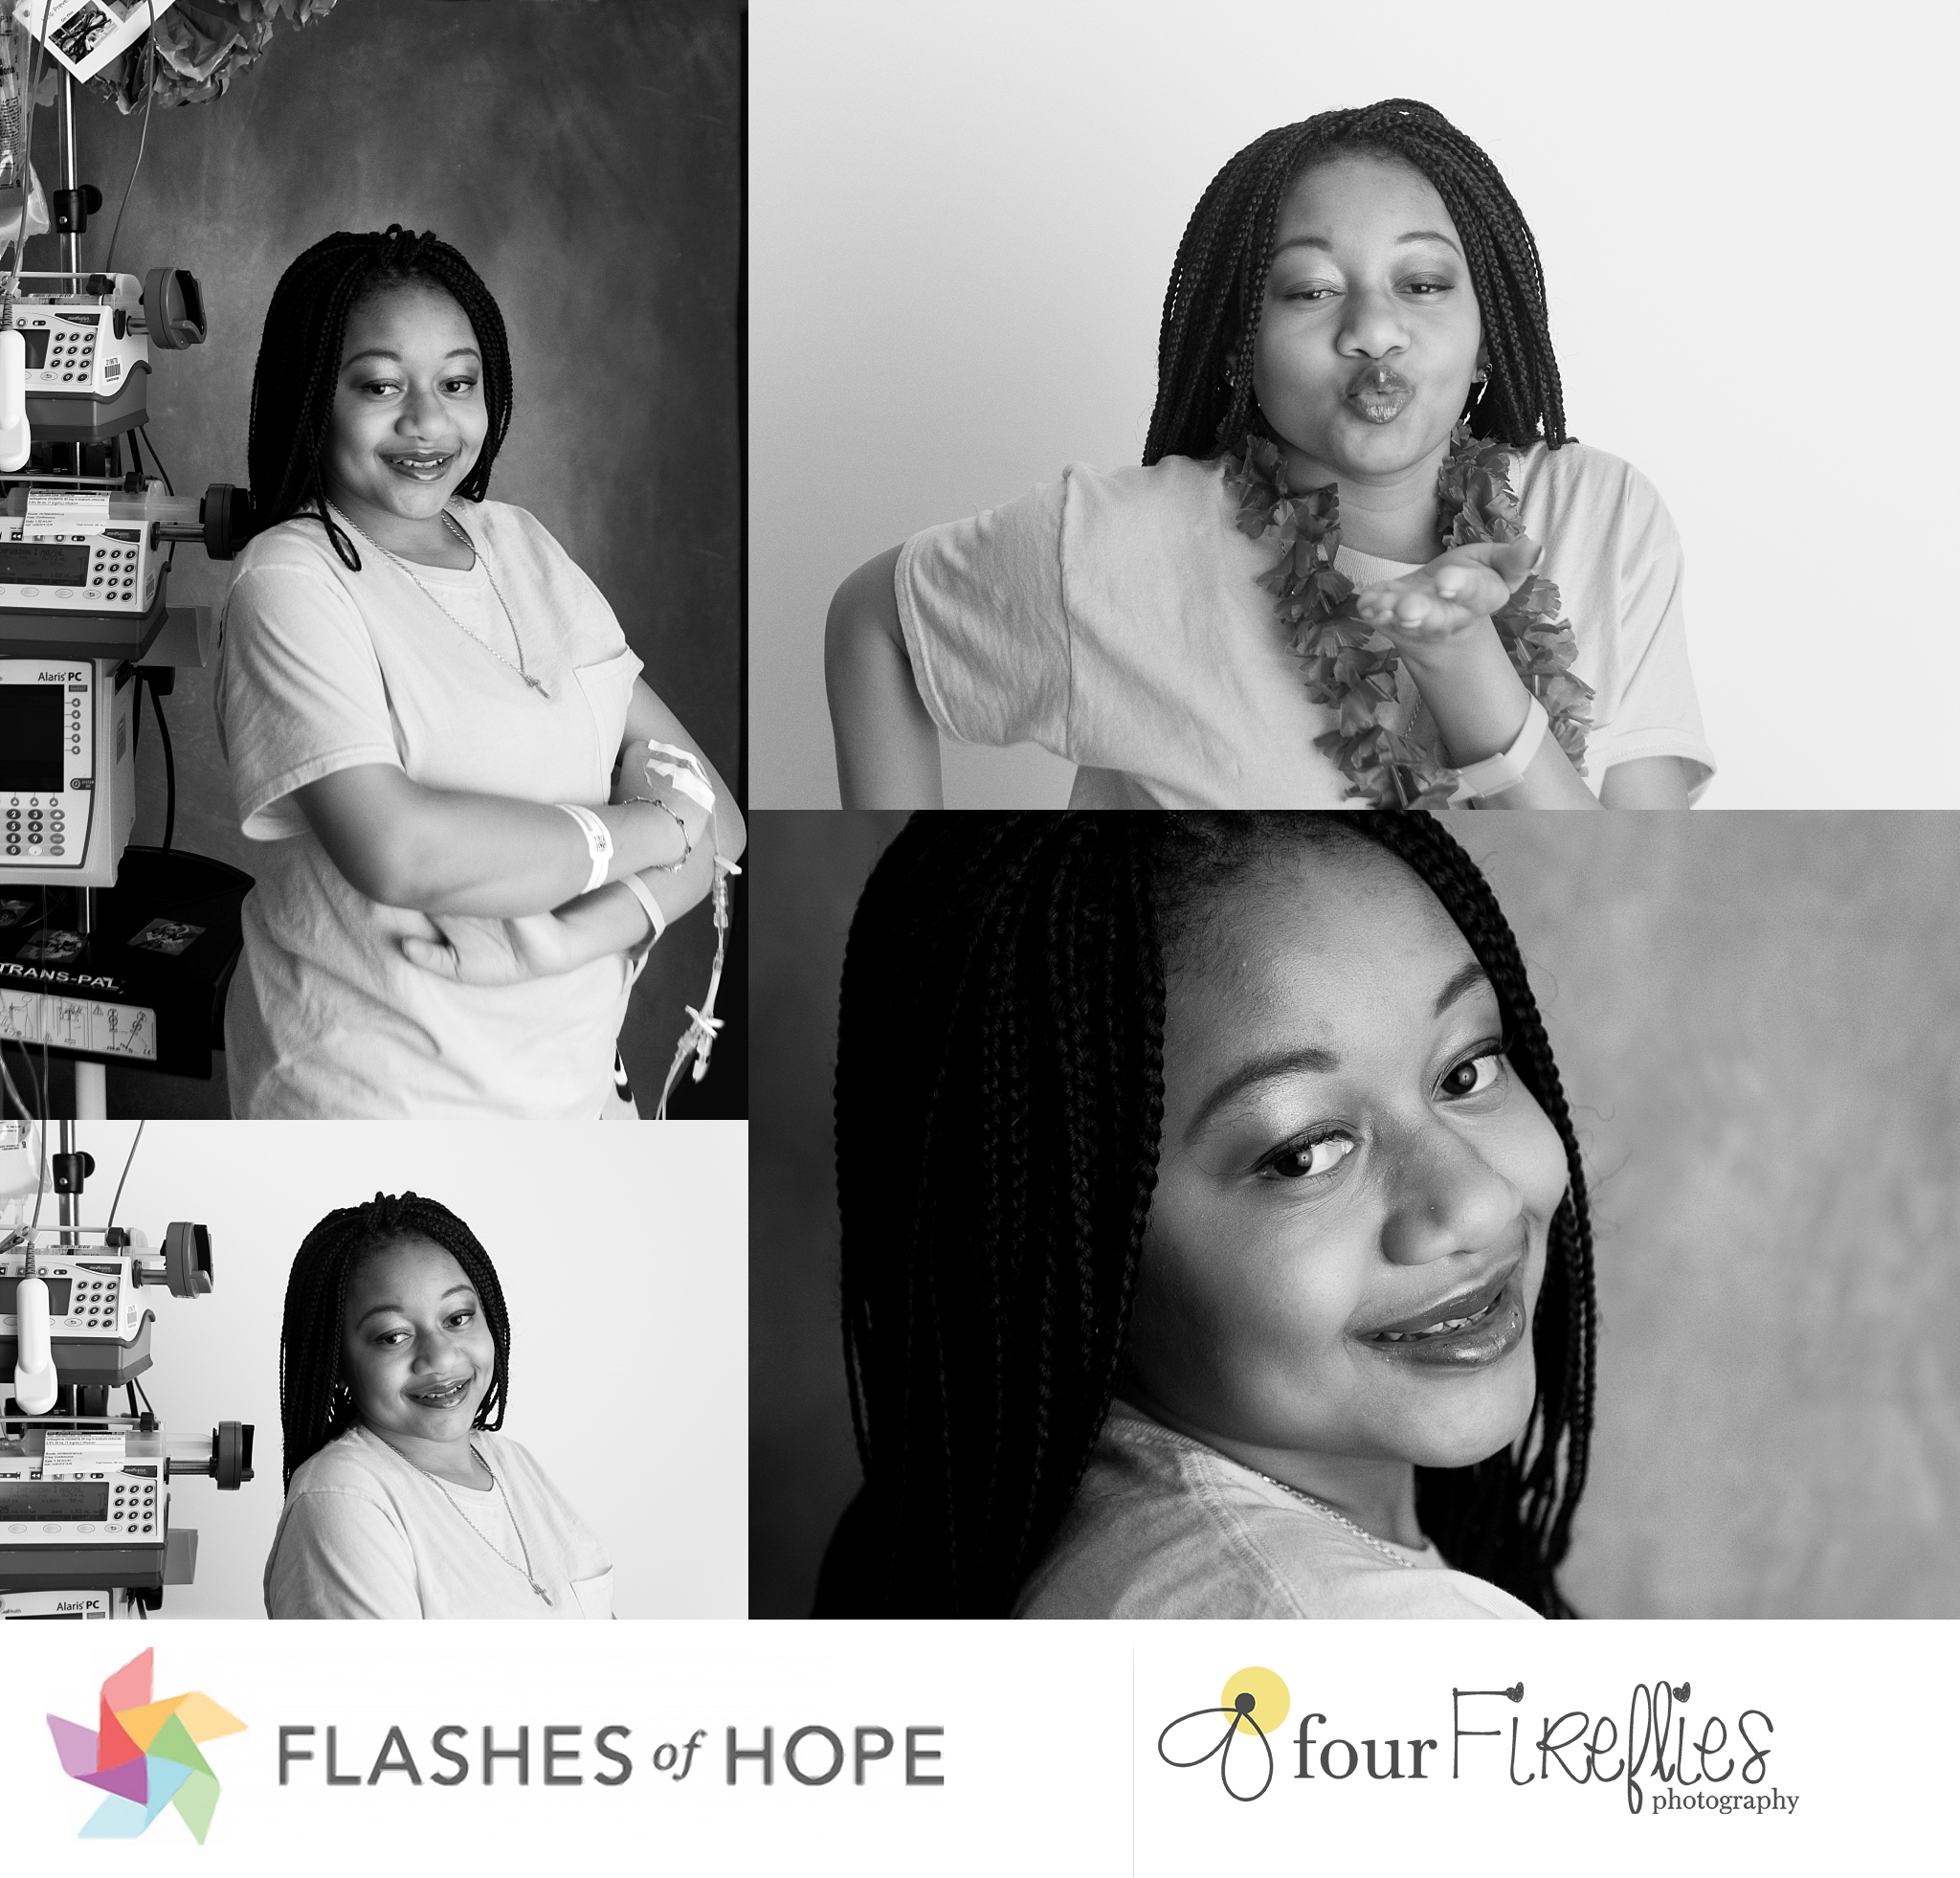 st-louis-photographer-flashes-of-hope-collage-girl-fighting-cancer-at-childrens-hospital.jpg